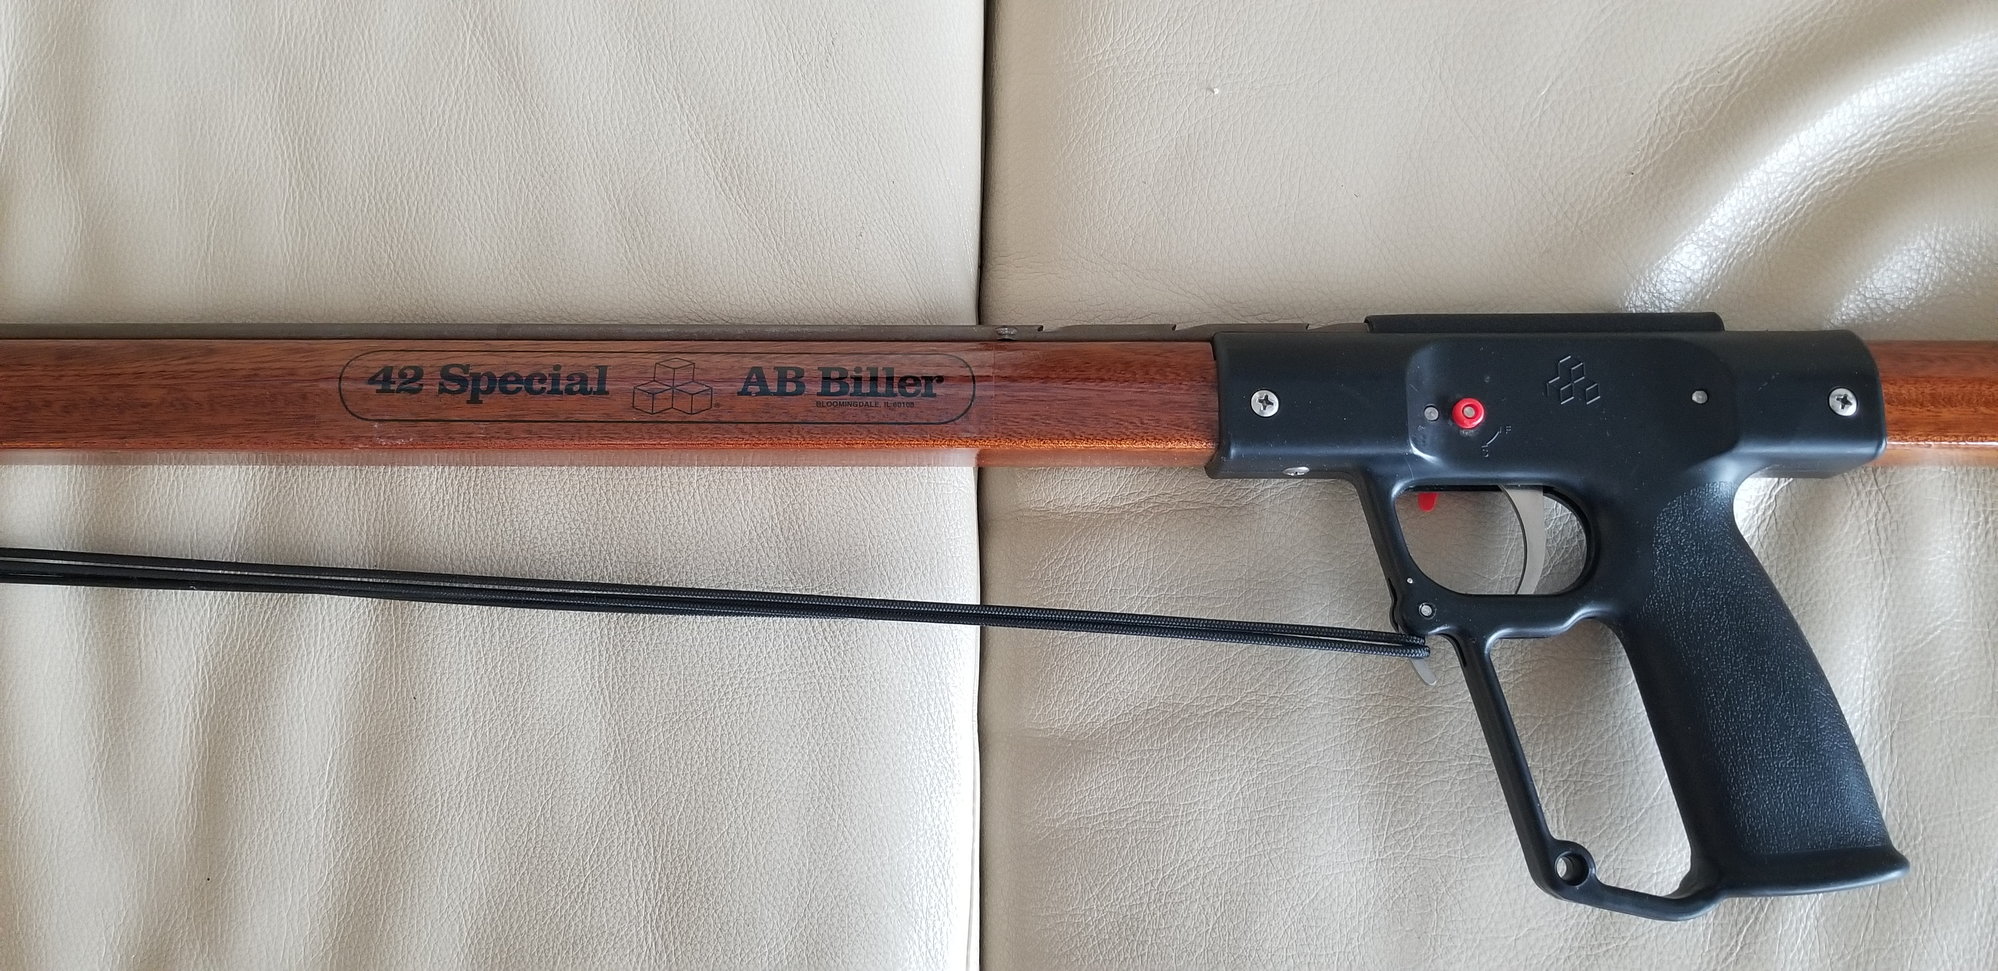 Brand new speargun ab biller 42 special - The Hull Truth - Boating